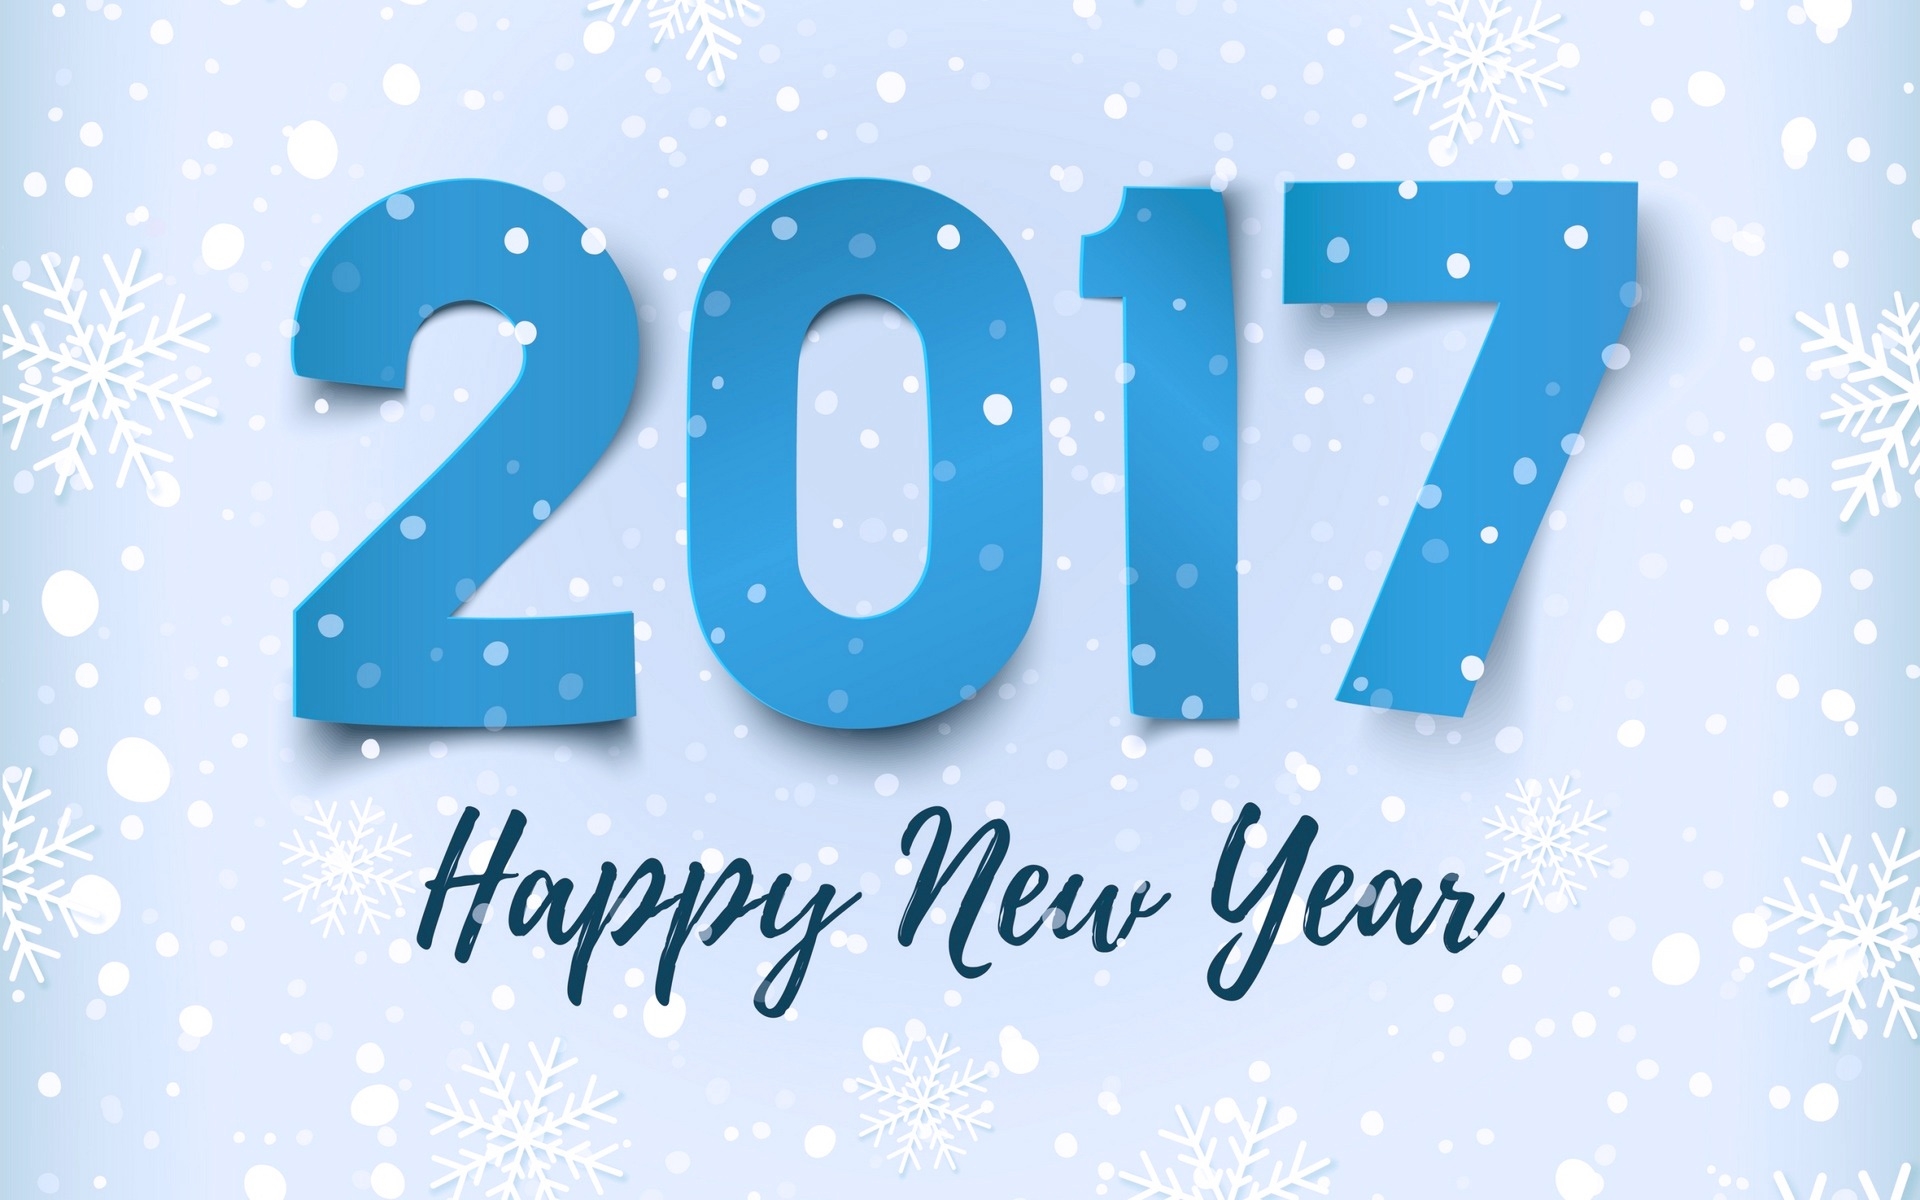 holiday, new year 2017, blue, new year, snow